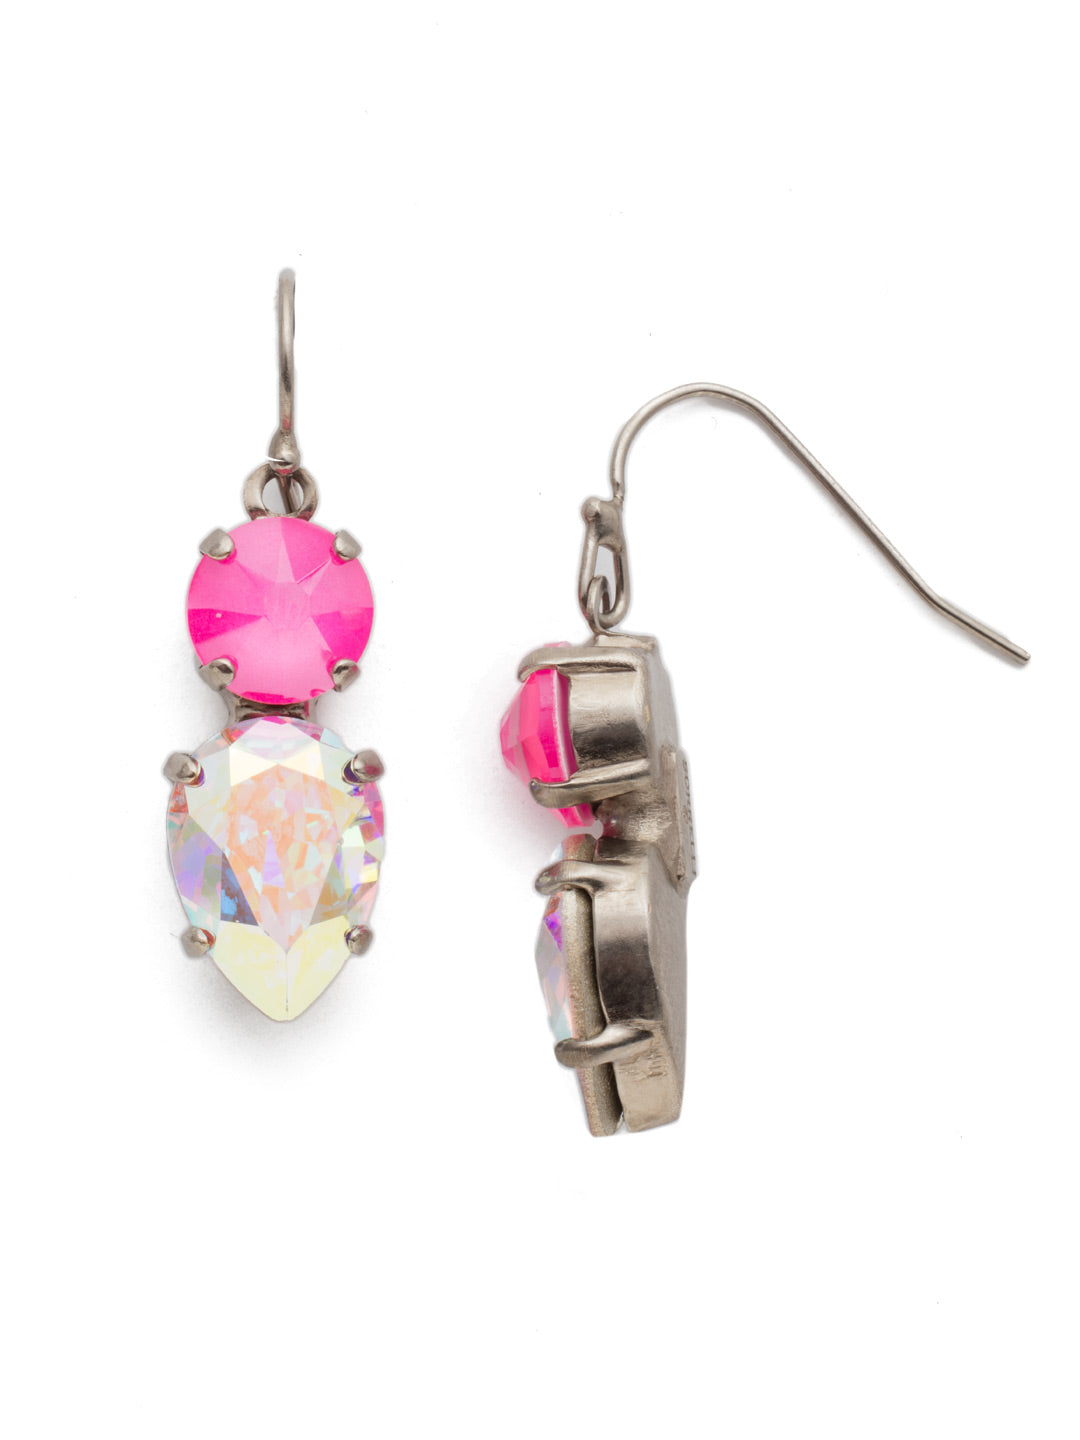 Brilliant Teardrop Dangle Earrings - EDH62ASETP - A brilliant teardrop crystal hanging from a round crystal post make these earrings perfect for any occasion From Sorrelli's Electric Pink collection in our Antique Silver-tone finish.